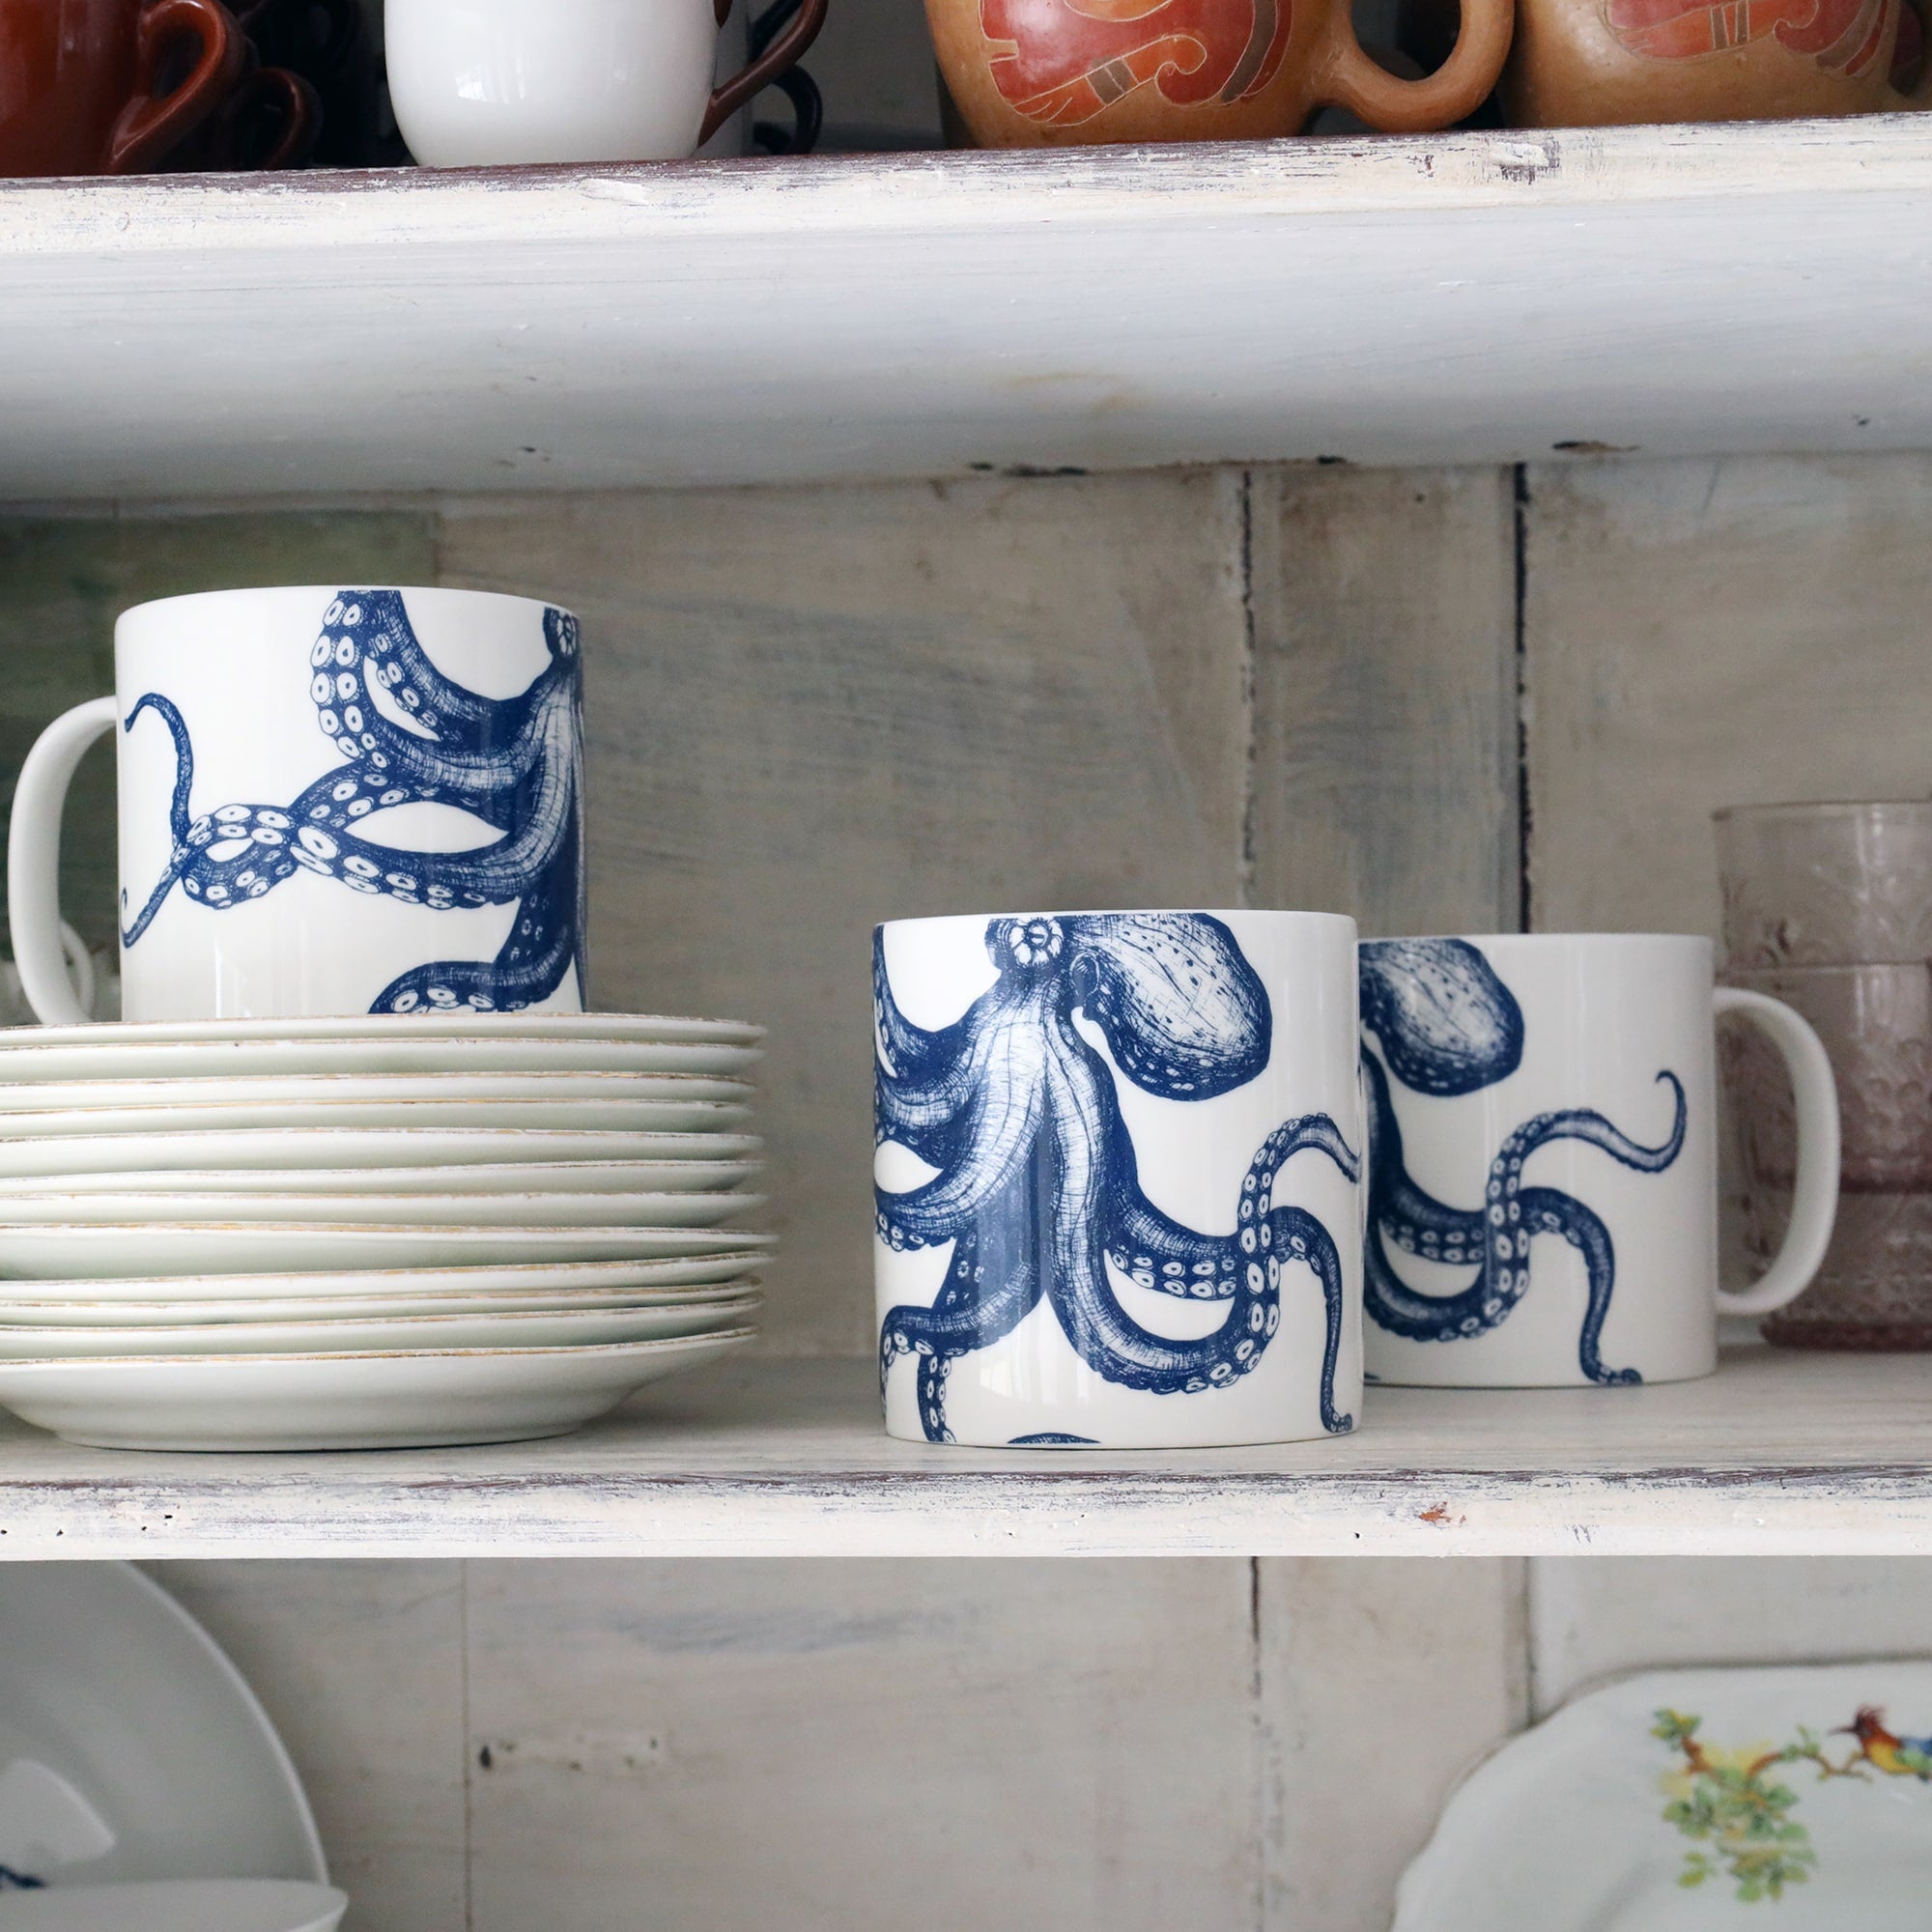 3 white bone china mugs with a navy octopus illustration on them, sitting on a cupboard shelf with other china around them.